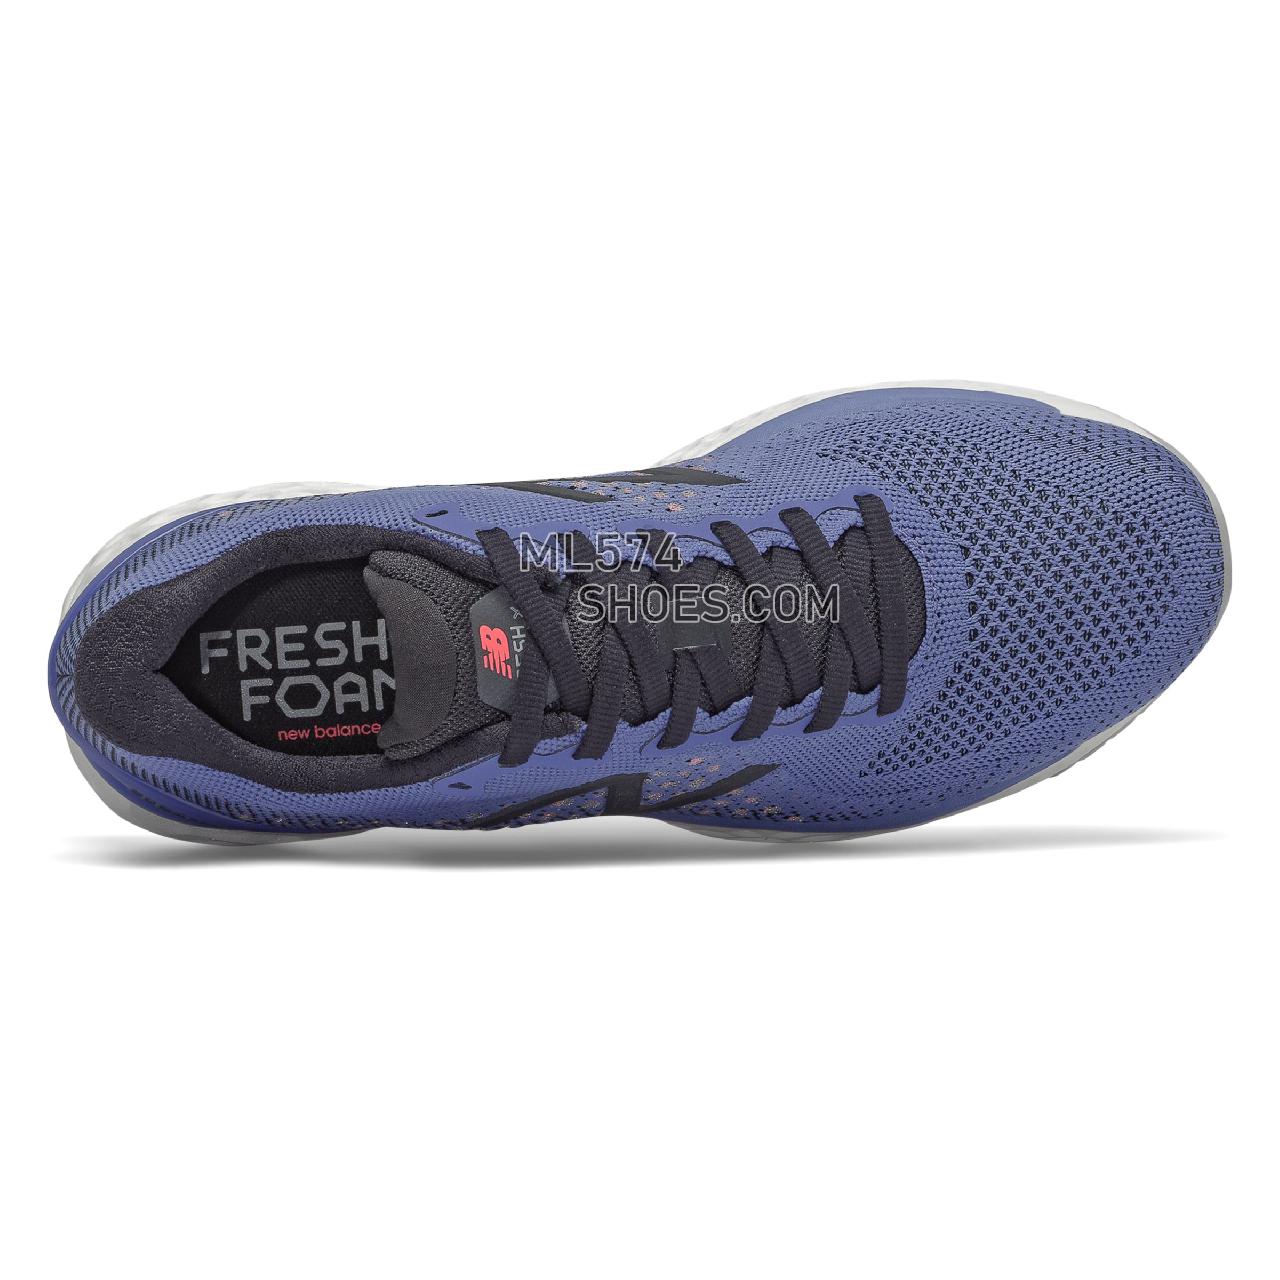 New Balance Fresh Foam 880v10 - Women's 800 Series - Magnetic Blue with Guava and Black - W880A10